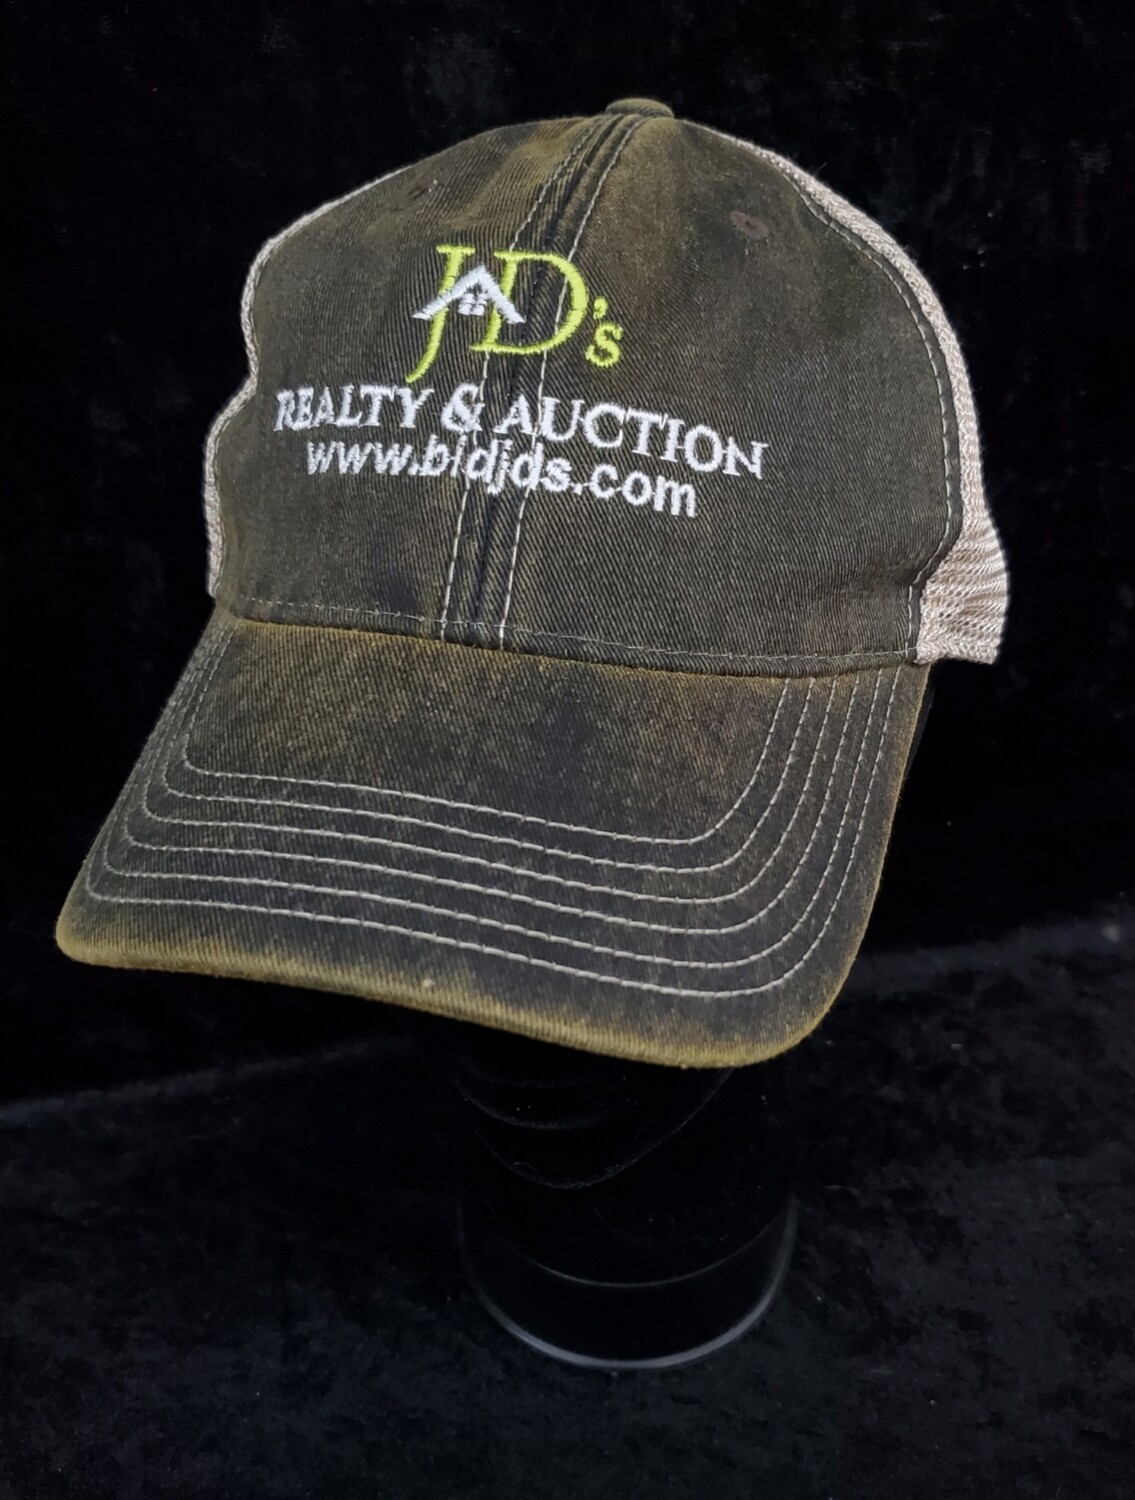 JD's Realty & Auction Trucker Hat